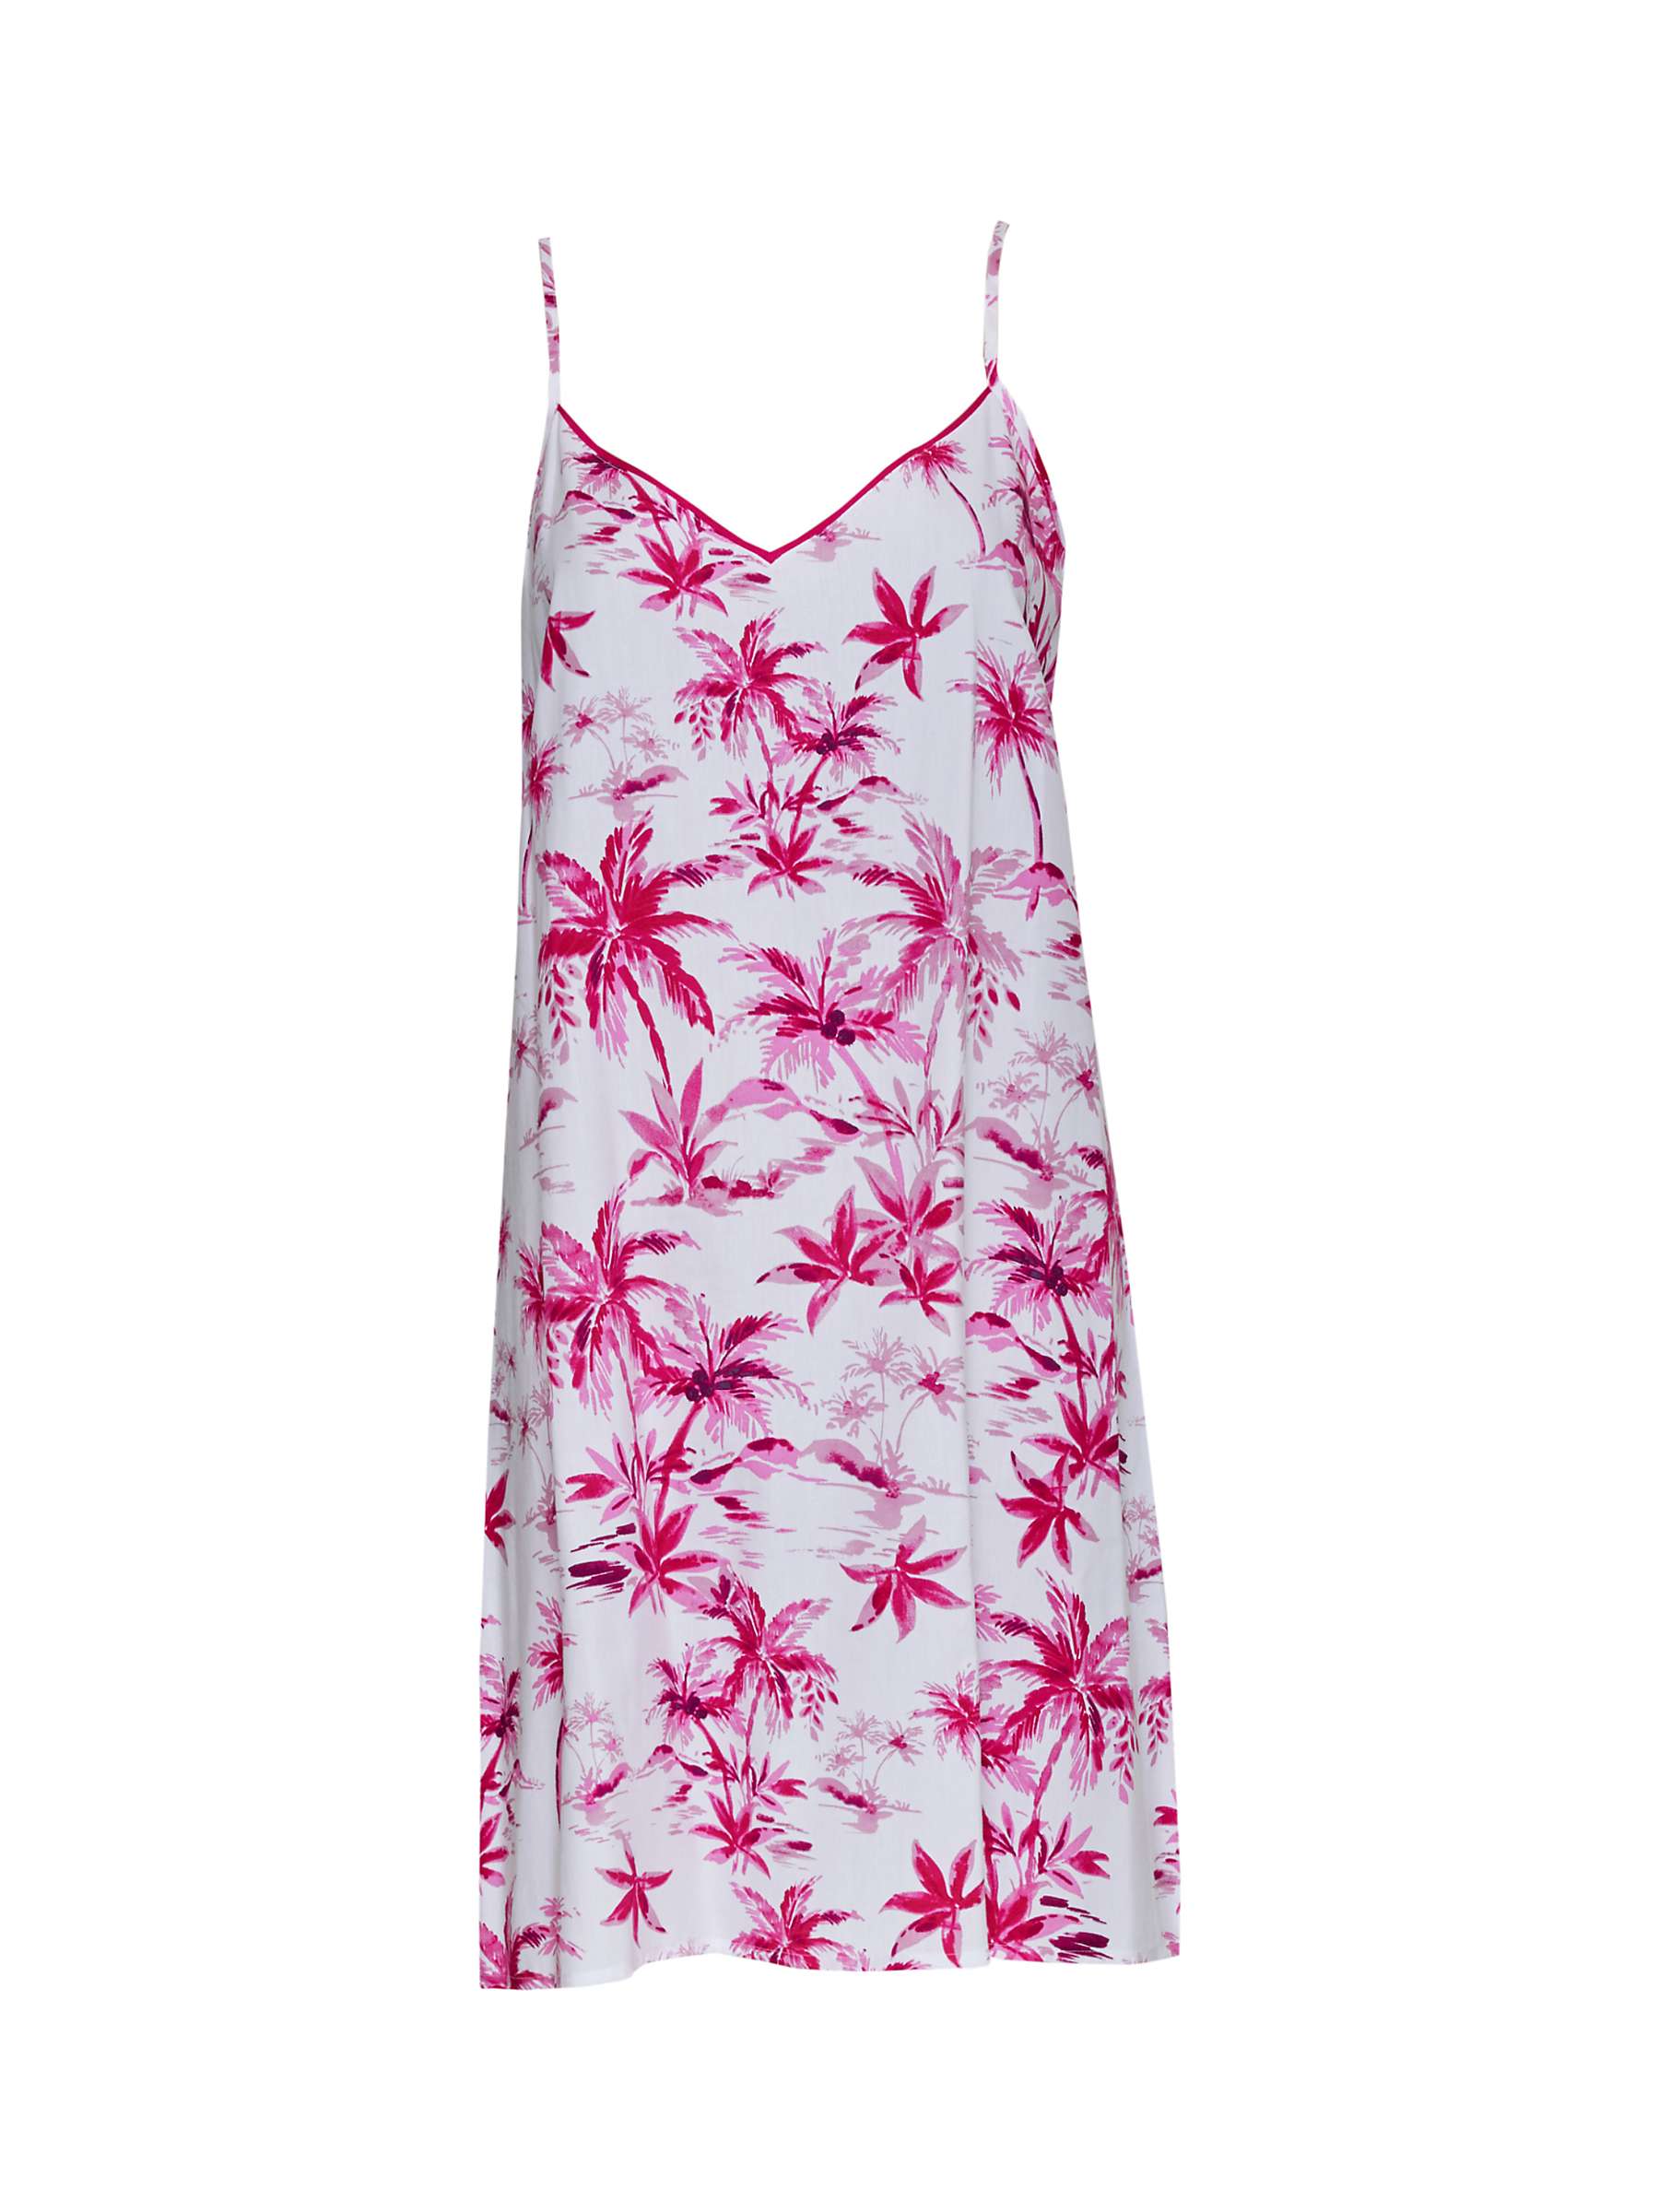 Buy Cyberjammies Hailey Palm Nightdress, White/Pink Online at johnlewis.com